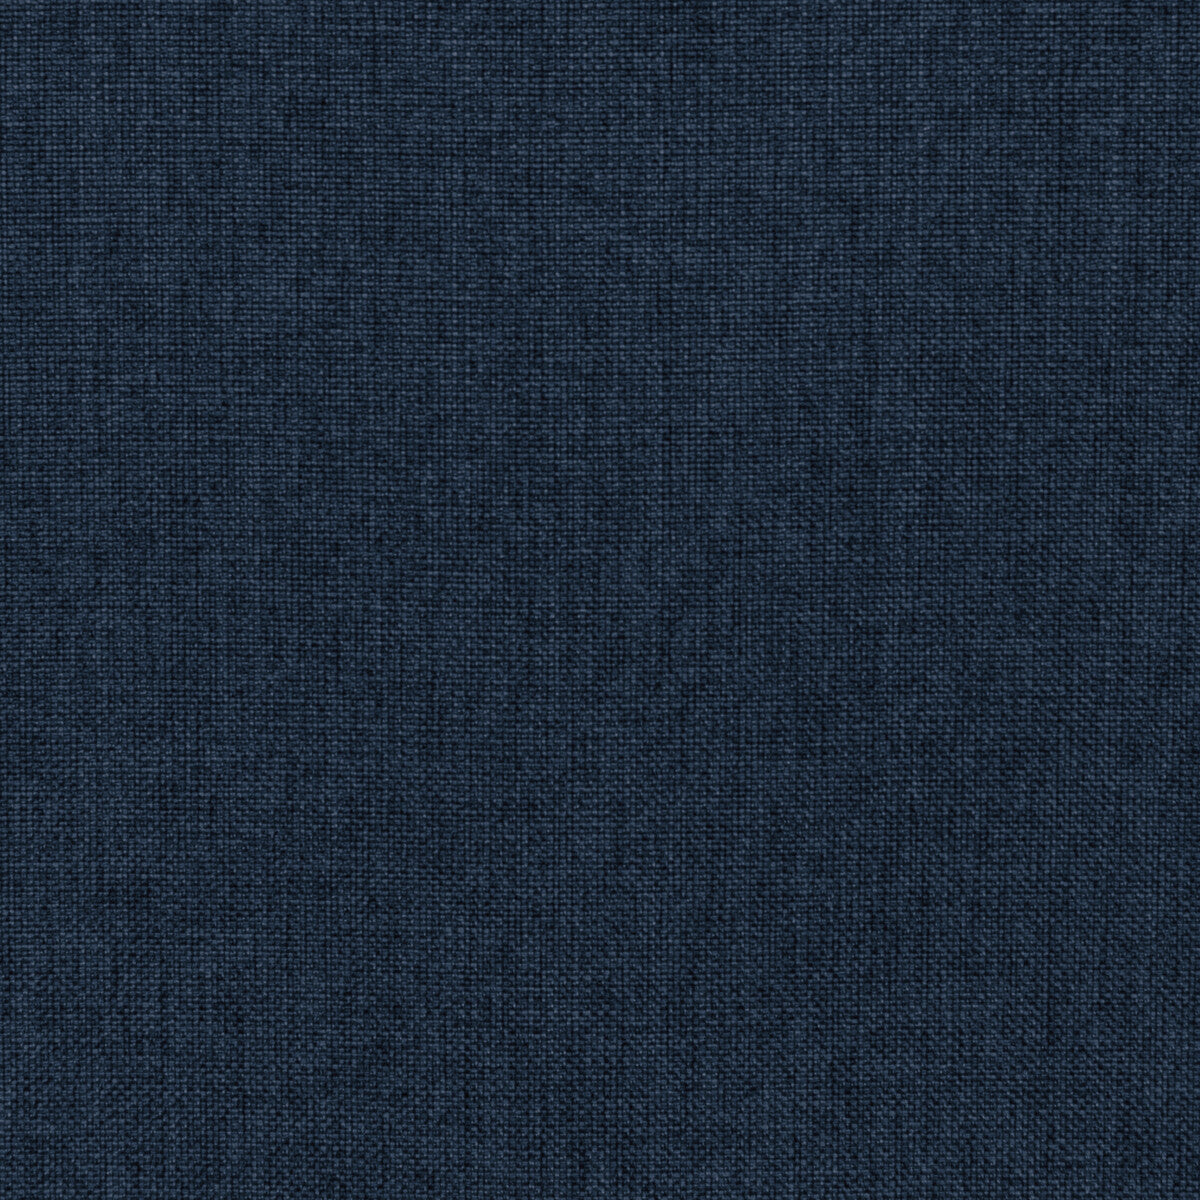 Fortify fabric in midnight color - pattern 36257.50.0 - by Kravet Contract in the Supreen collection